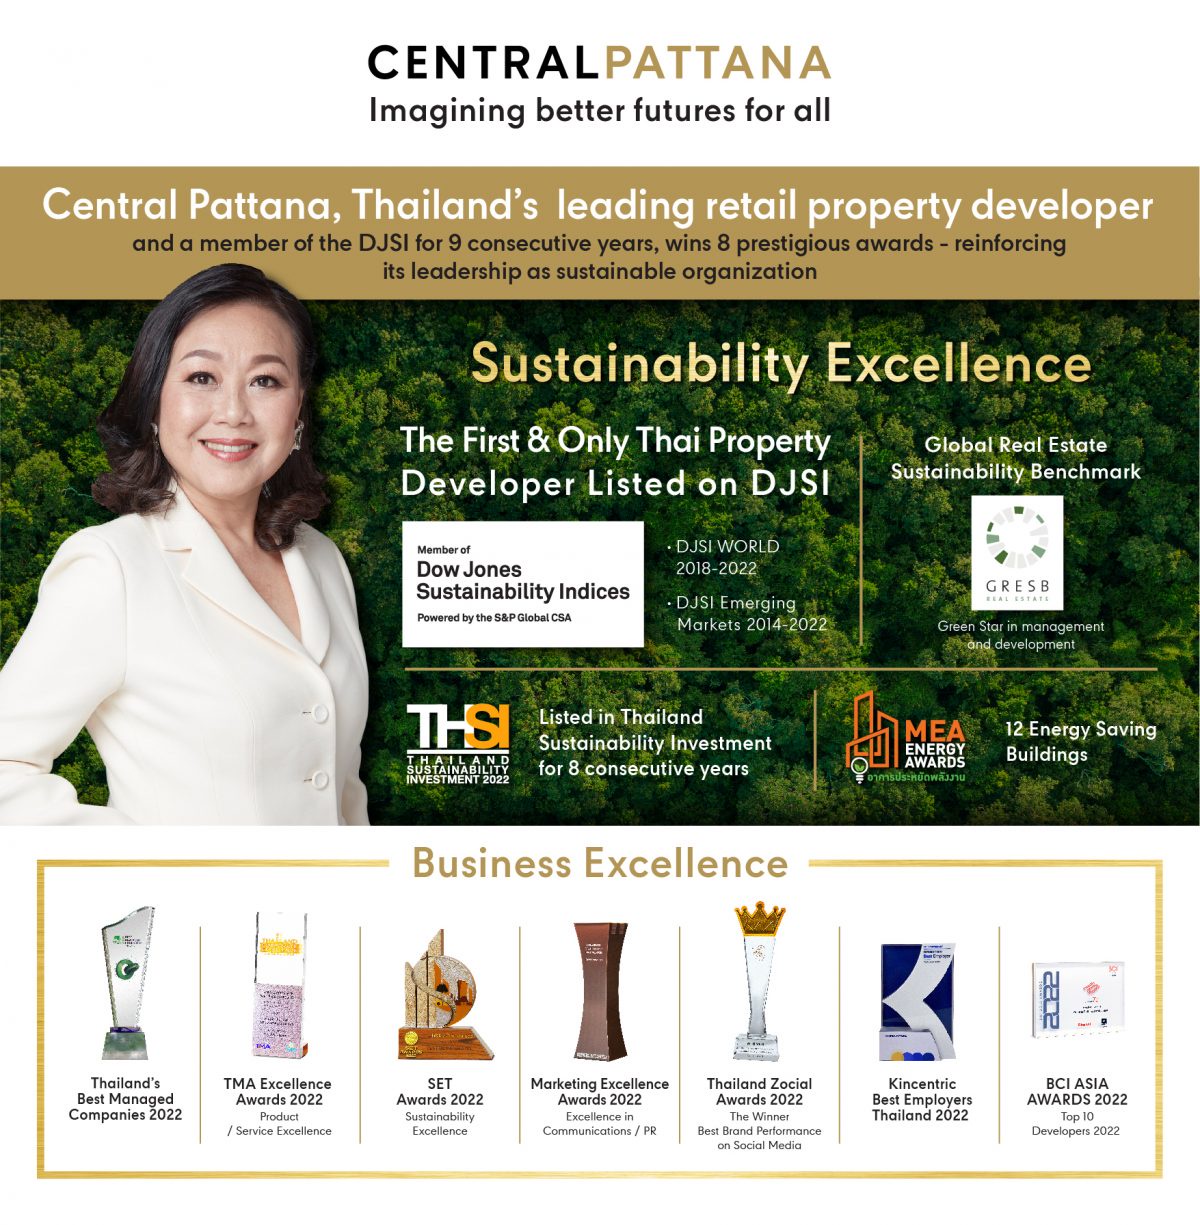 Central Pattana, Thailand's leading retail property developer and a member of DJSI for 9 consecutive years, wins 8 prestigious awards in